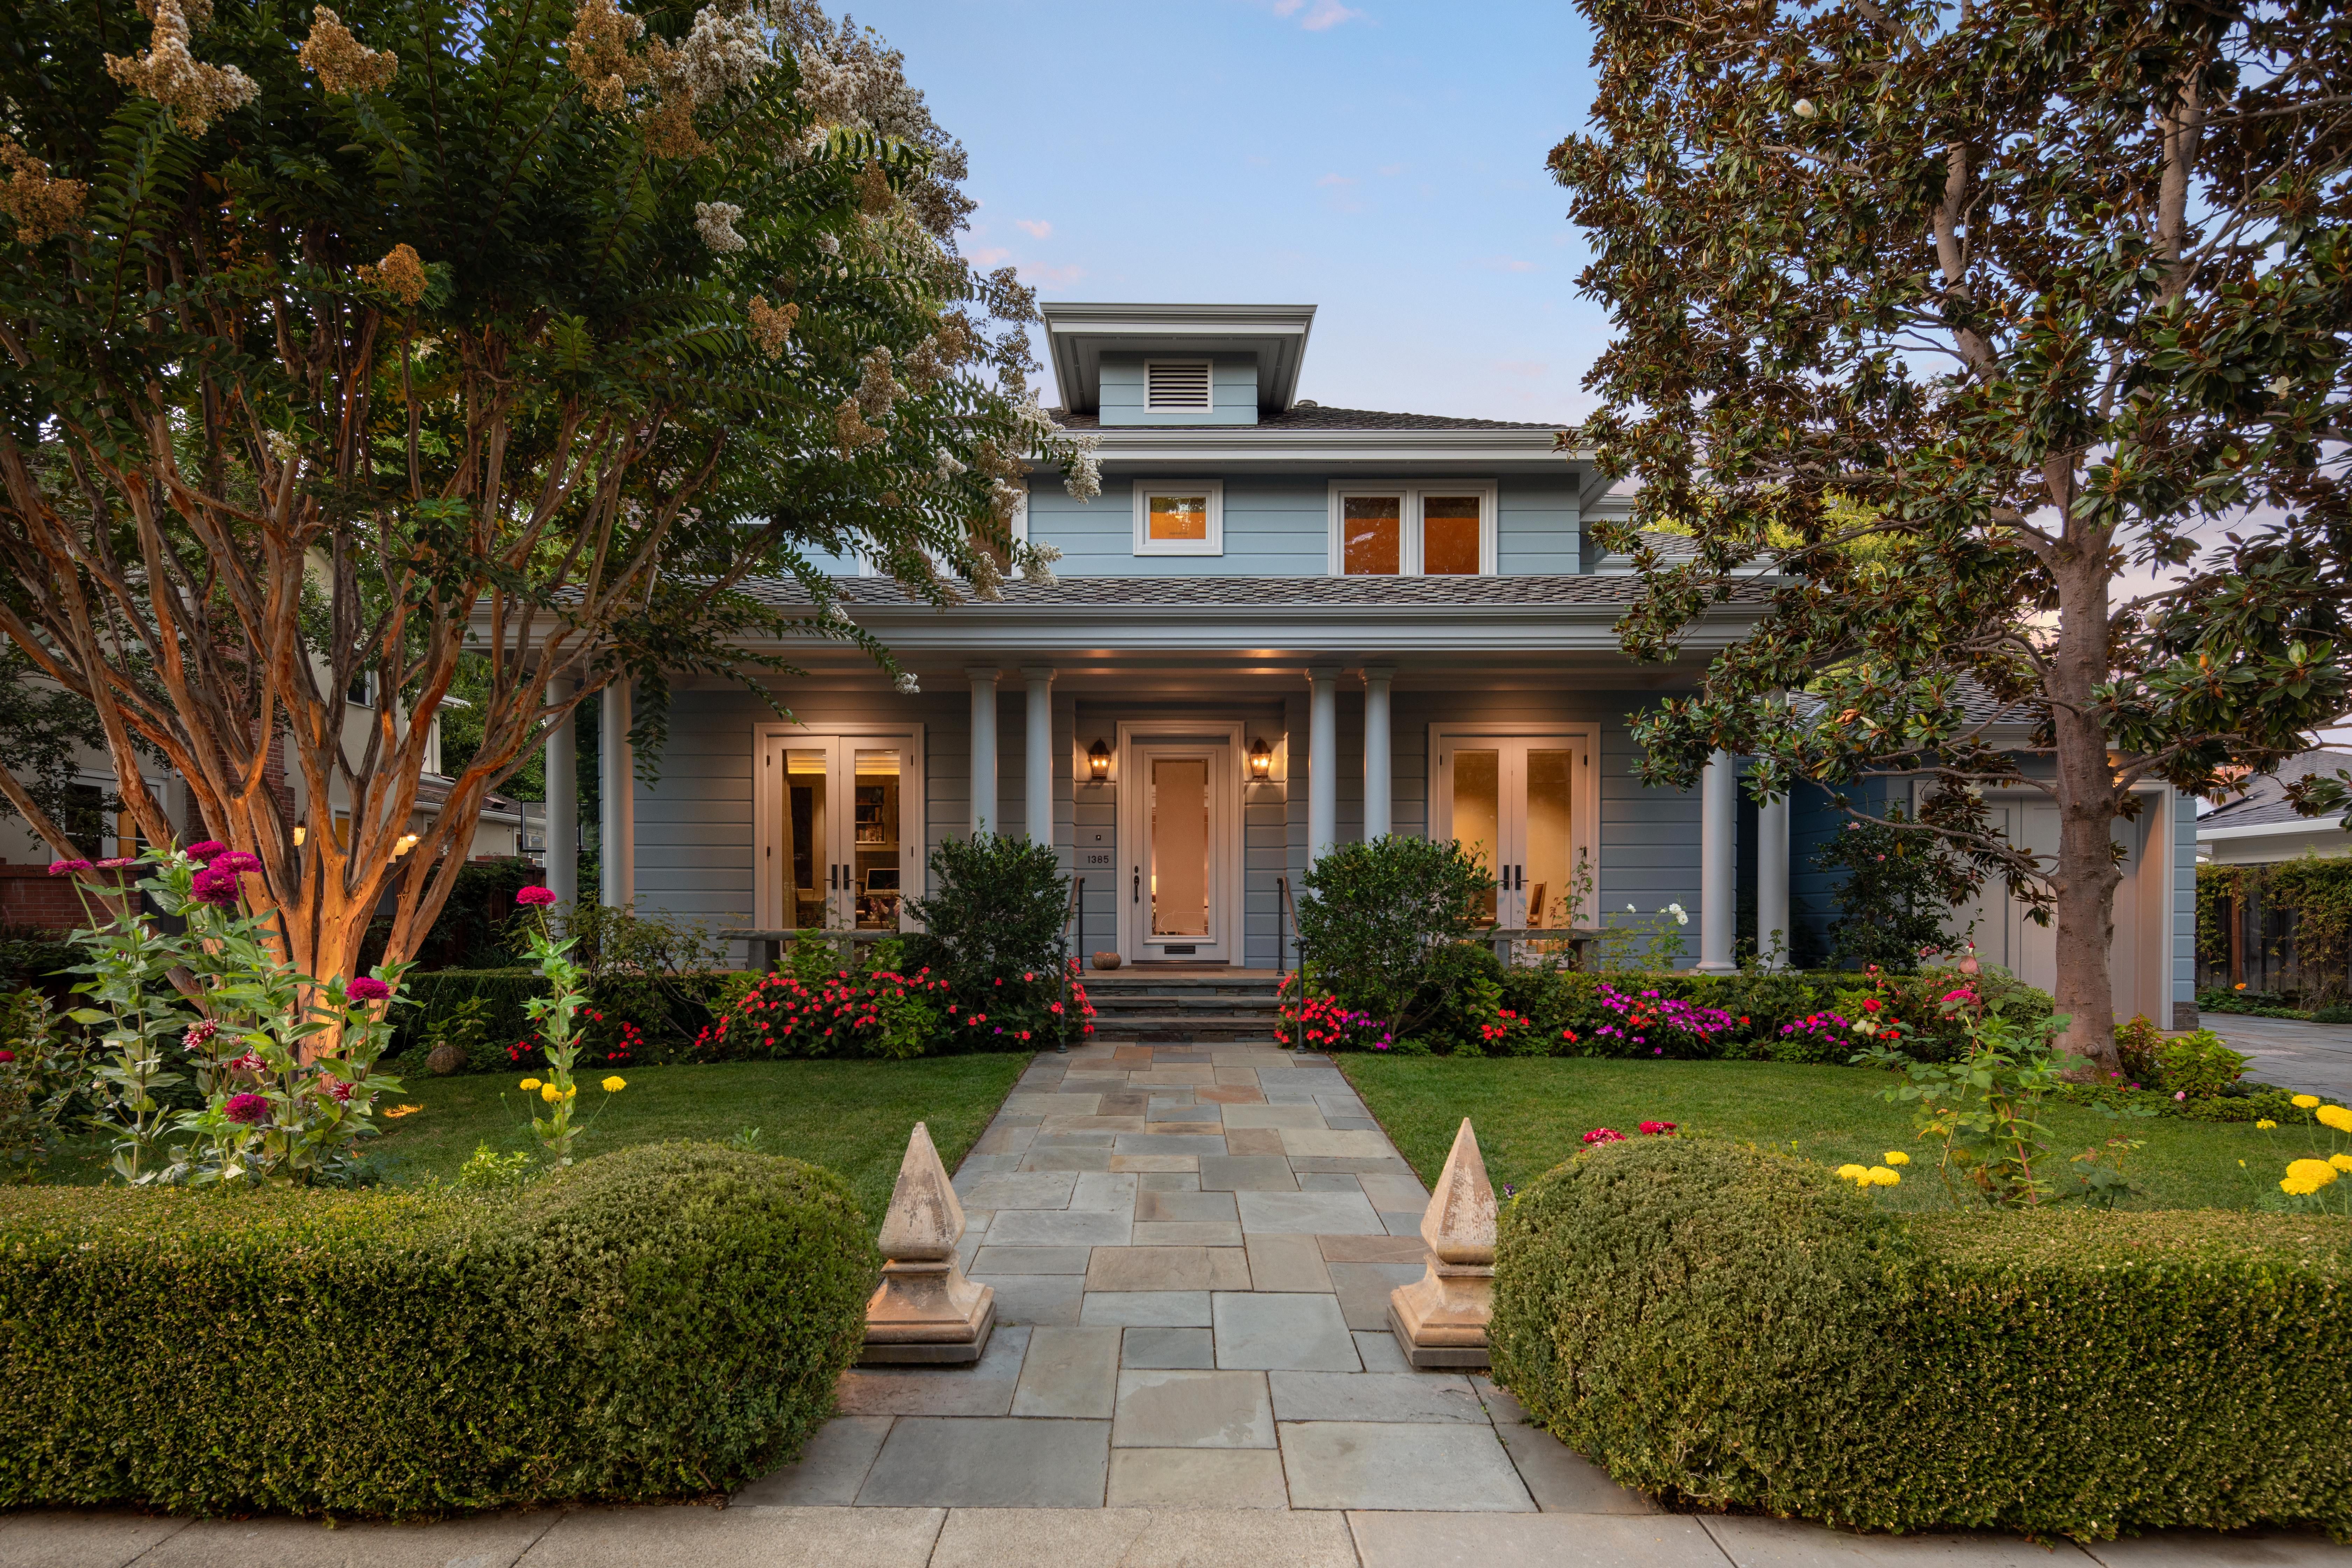 Crescent Park's Finest: A Crafted Luxury Home